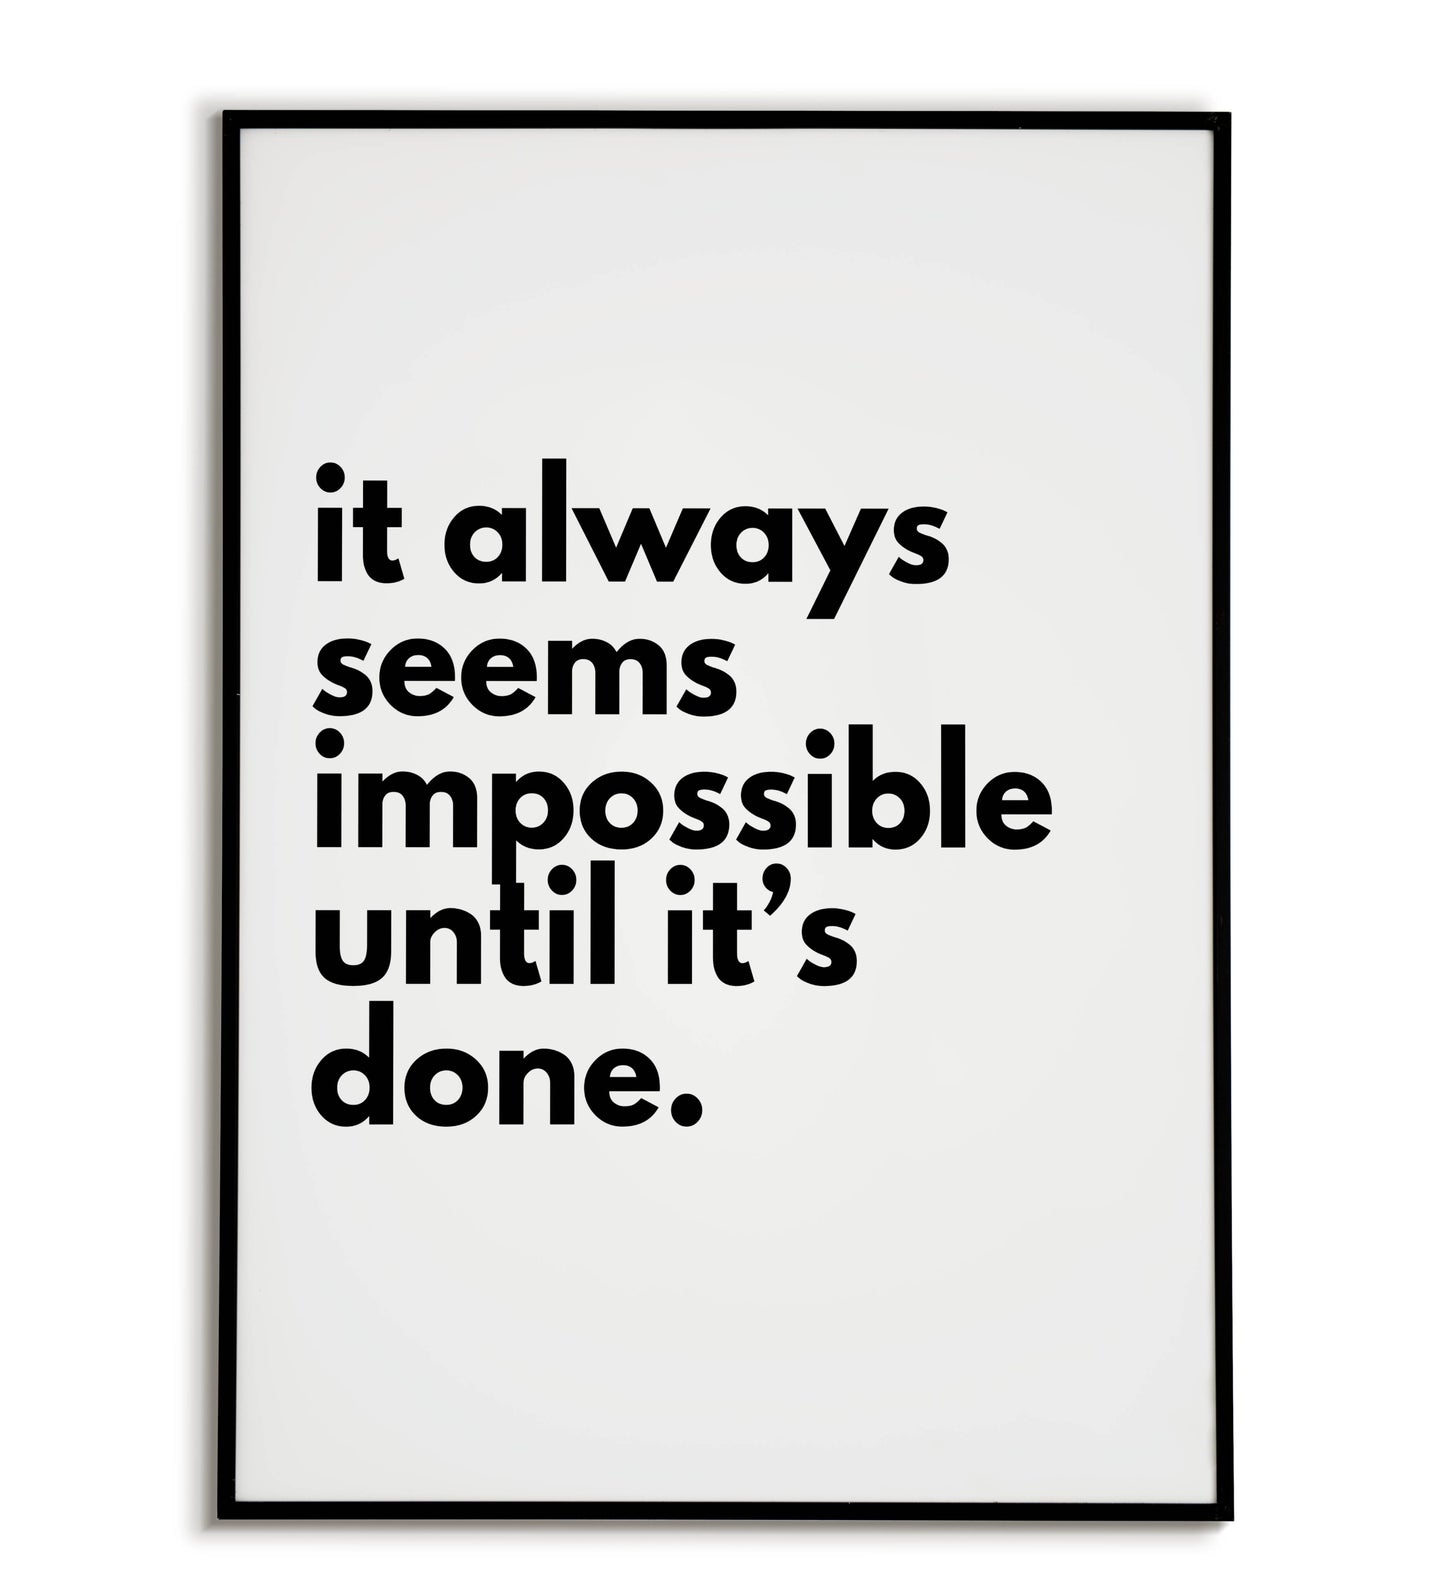 "It always seems impossible until it's done" printable motivational poster by Nelson Mandela.